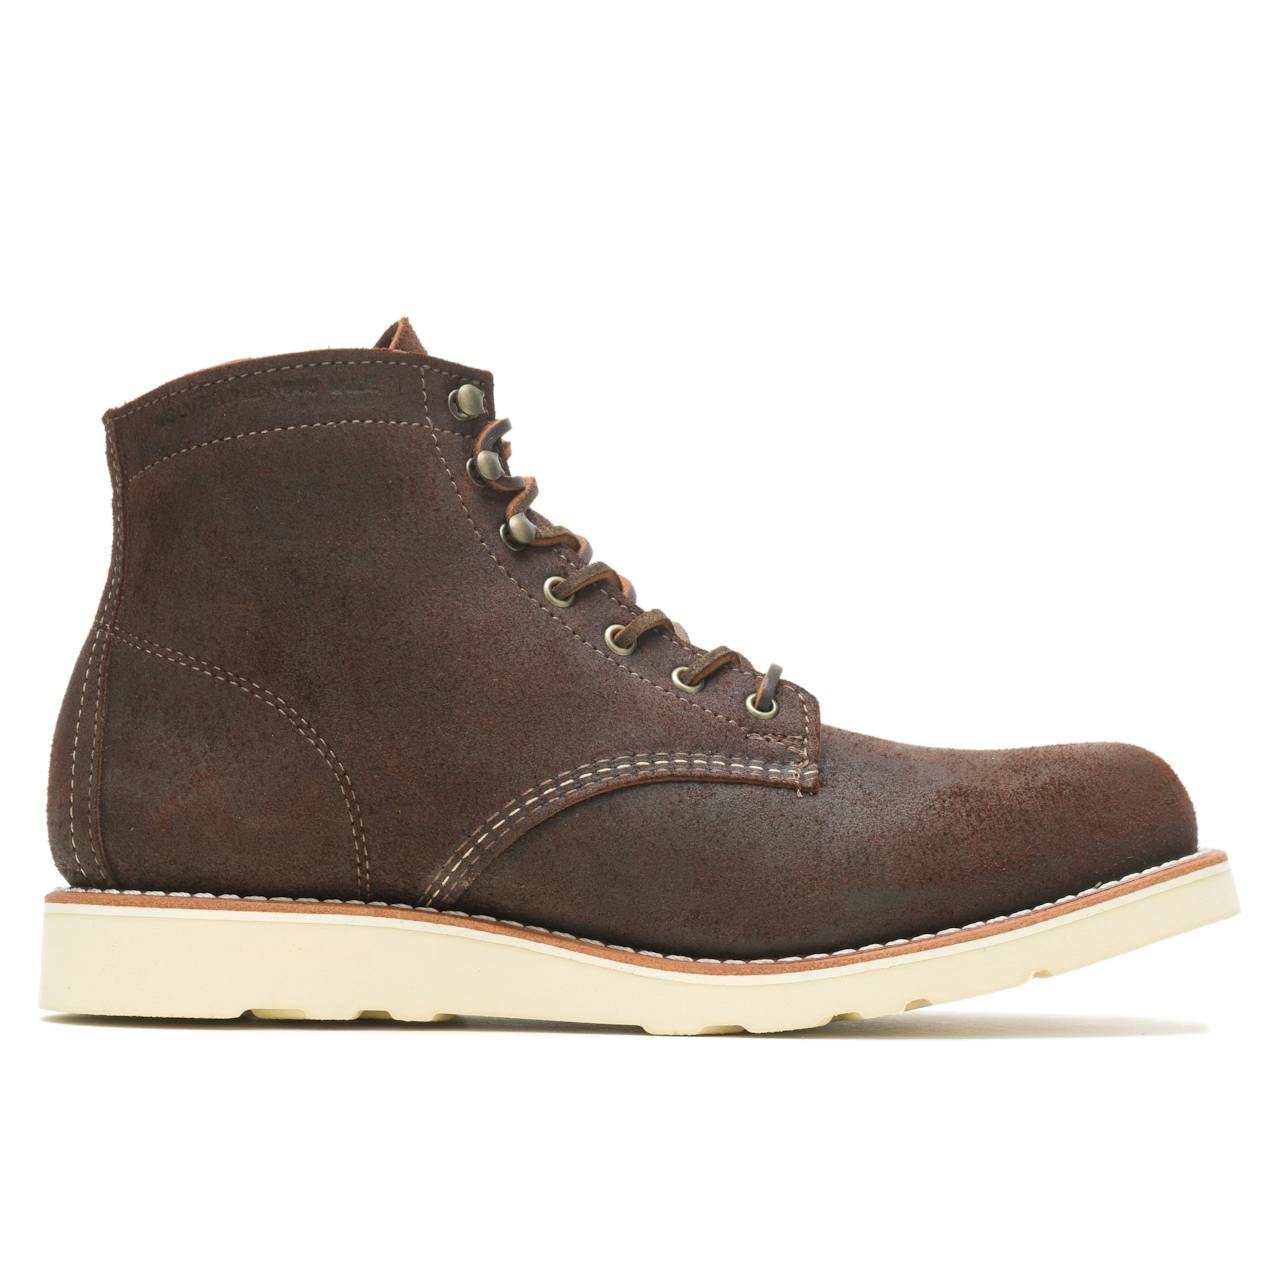 Wolverine 1000 Mile Path Less Traveled Boot Wedge